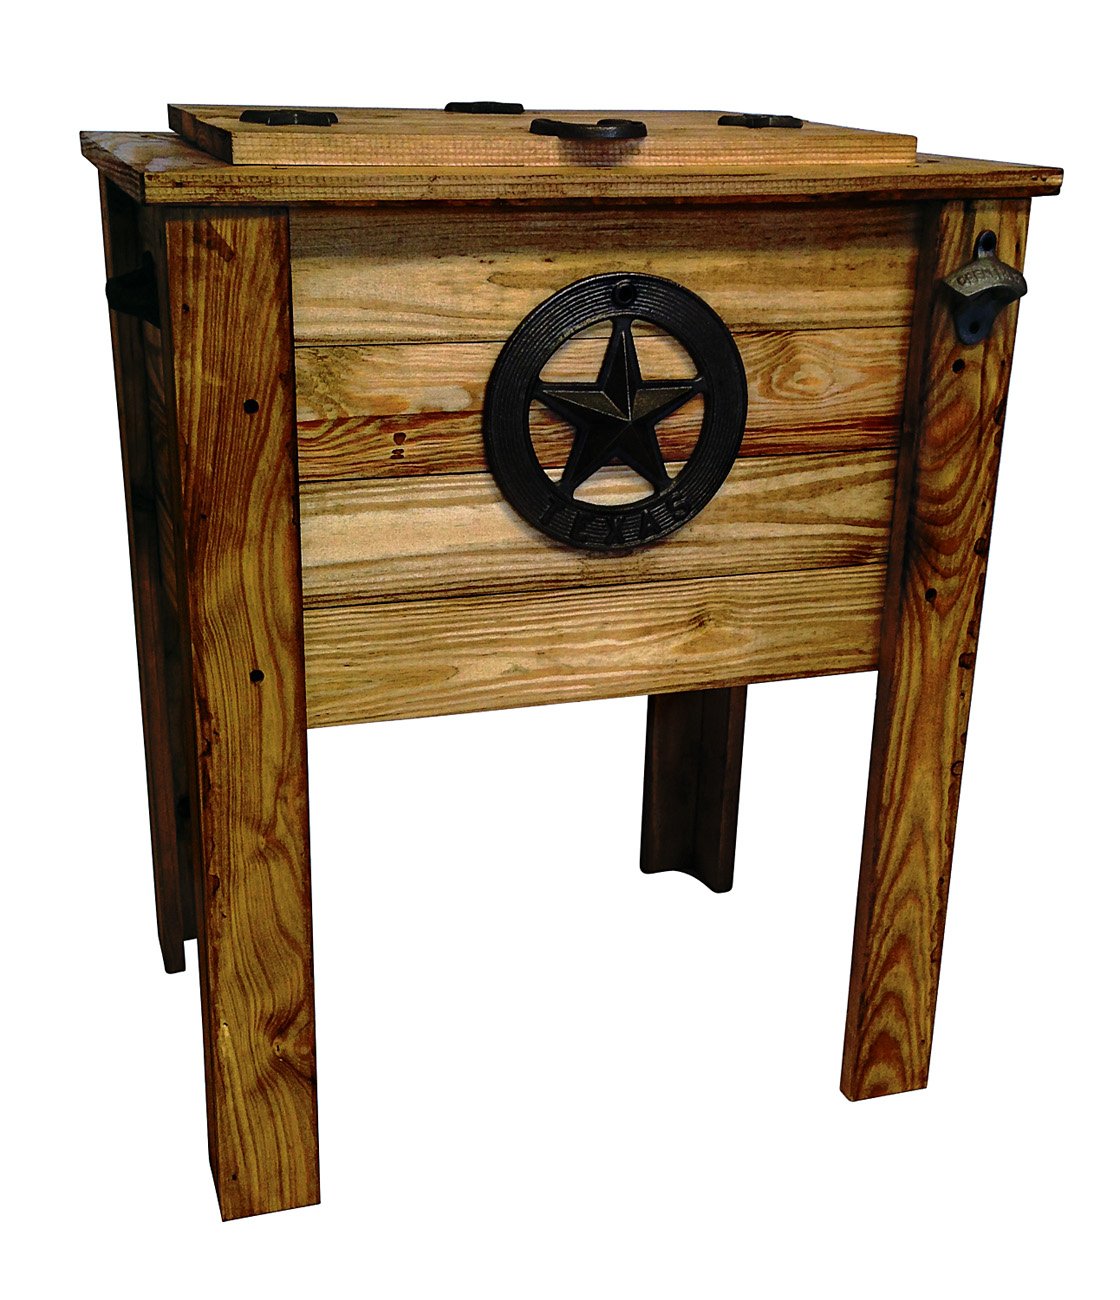 rustic coolers for sale